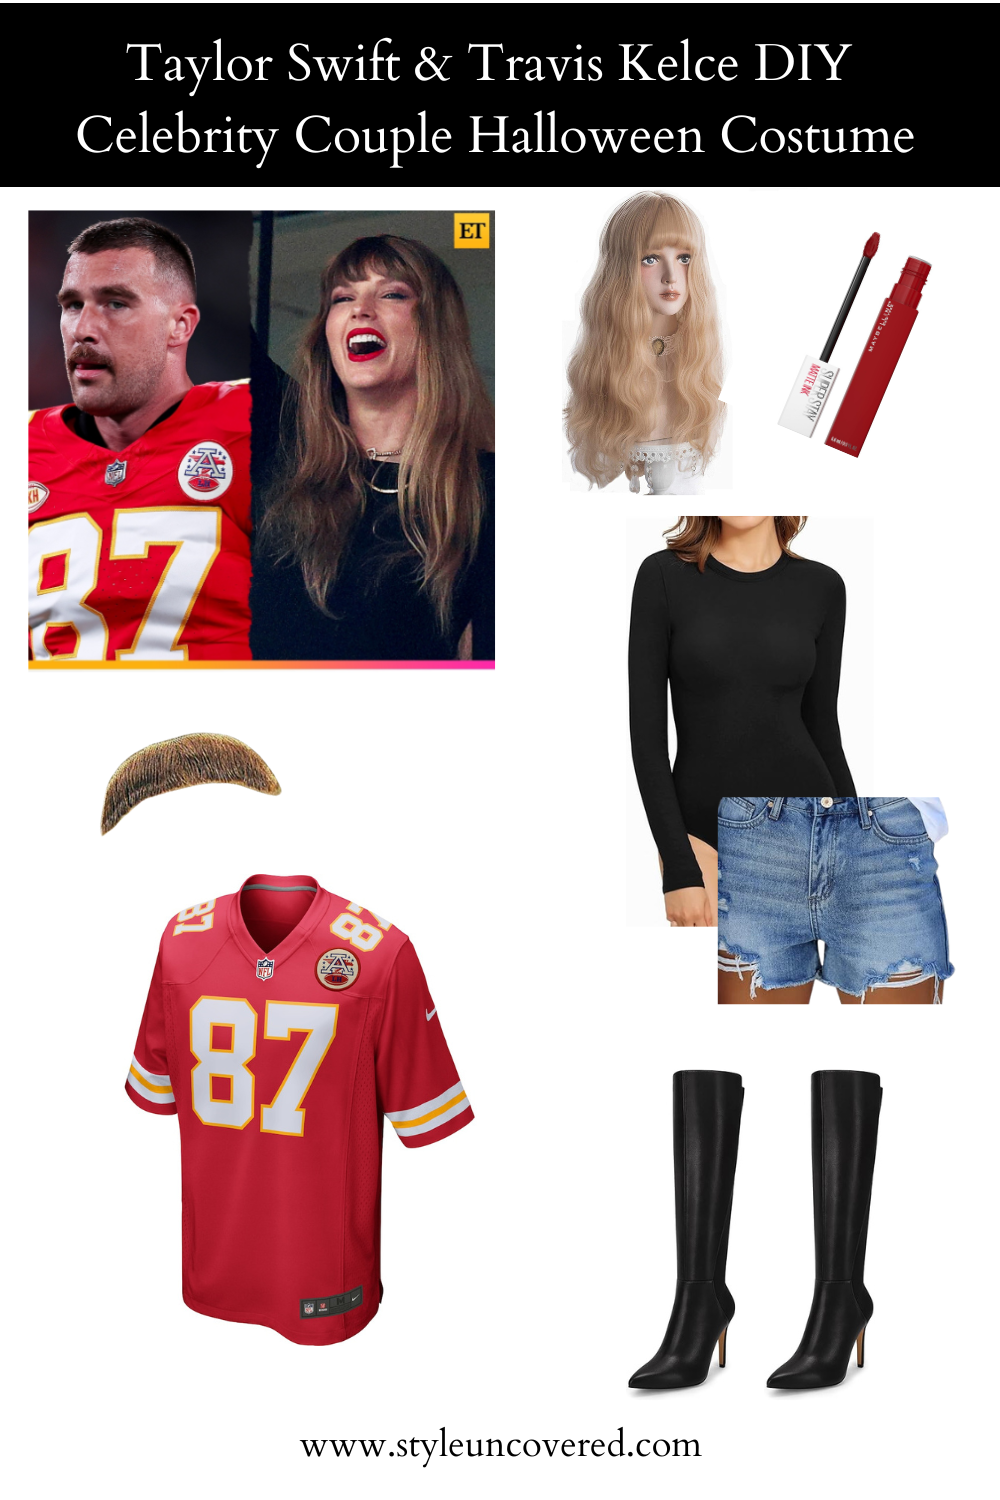 DIY Taylor Swift & Travis Kelce Costume for Halloween Style Uncovered